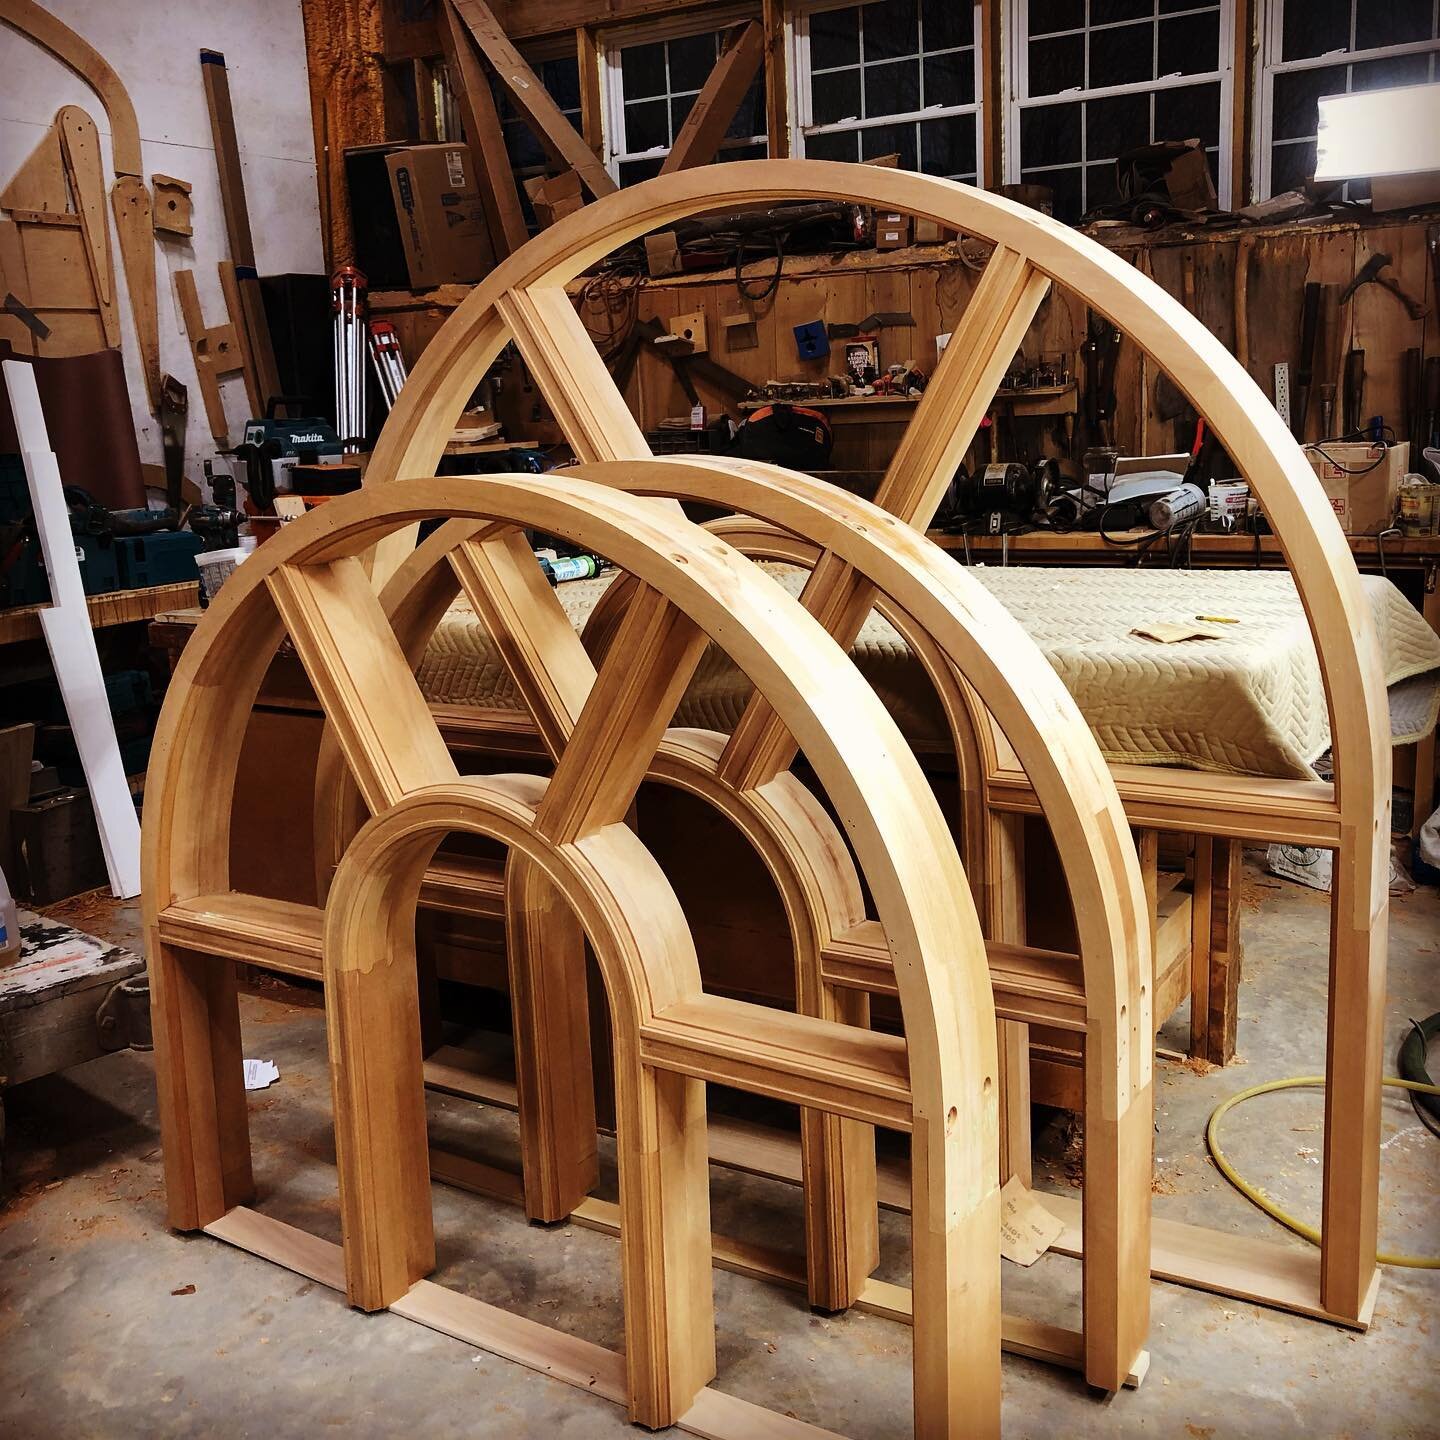 Been a good week of solid progress on these windows. Got the frames assembled minus the sills, after finishing the spoke housings and inner coved recess detail.
Sash and muntin stock was milled including most of the curved bits including developing t